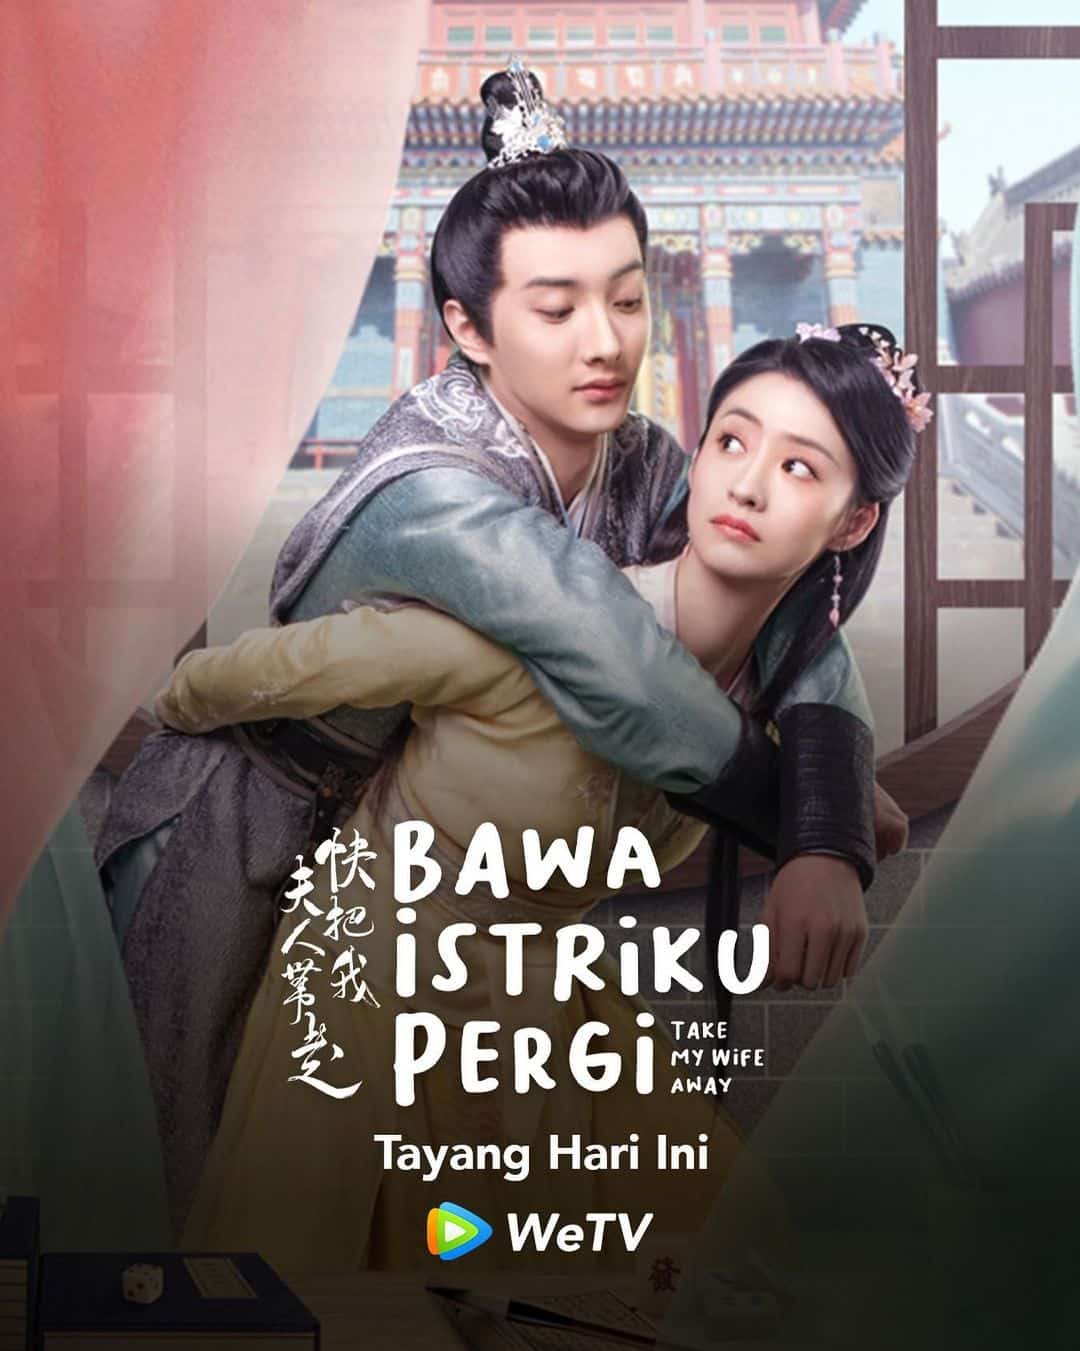 Take My Wife Away - Sinopsis, Pemain, OST, Episode, Review